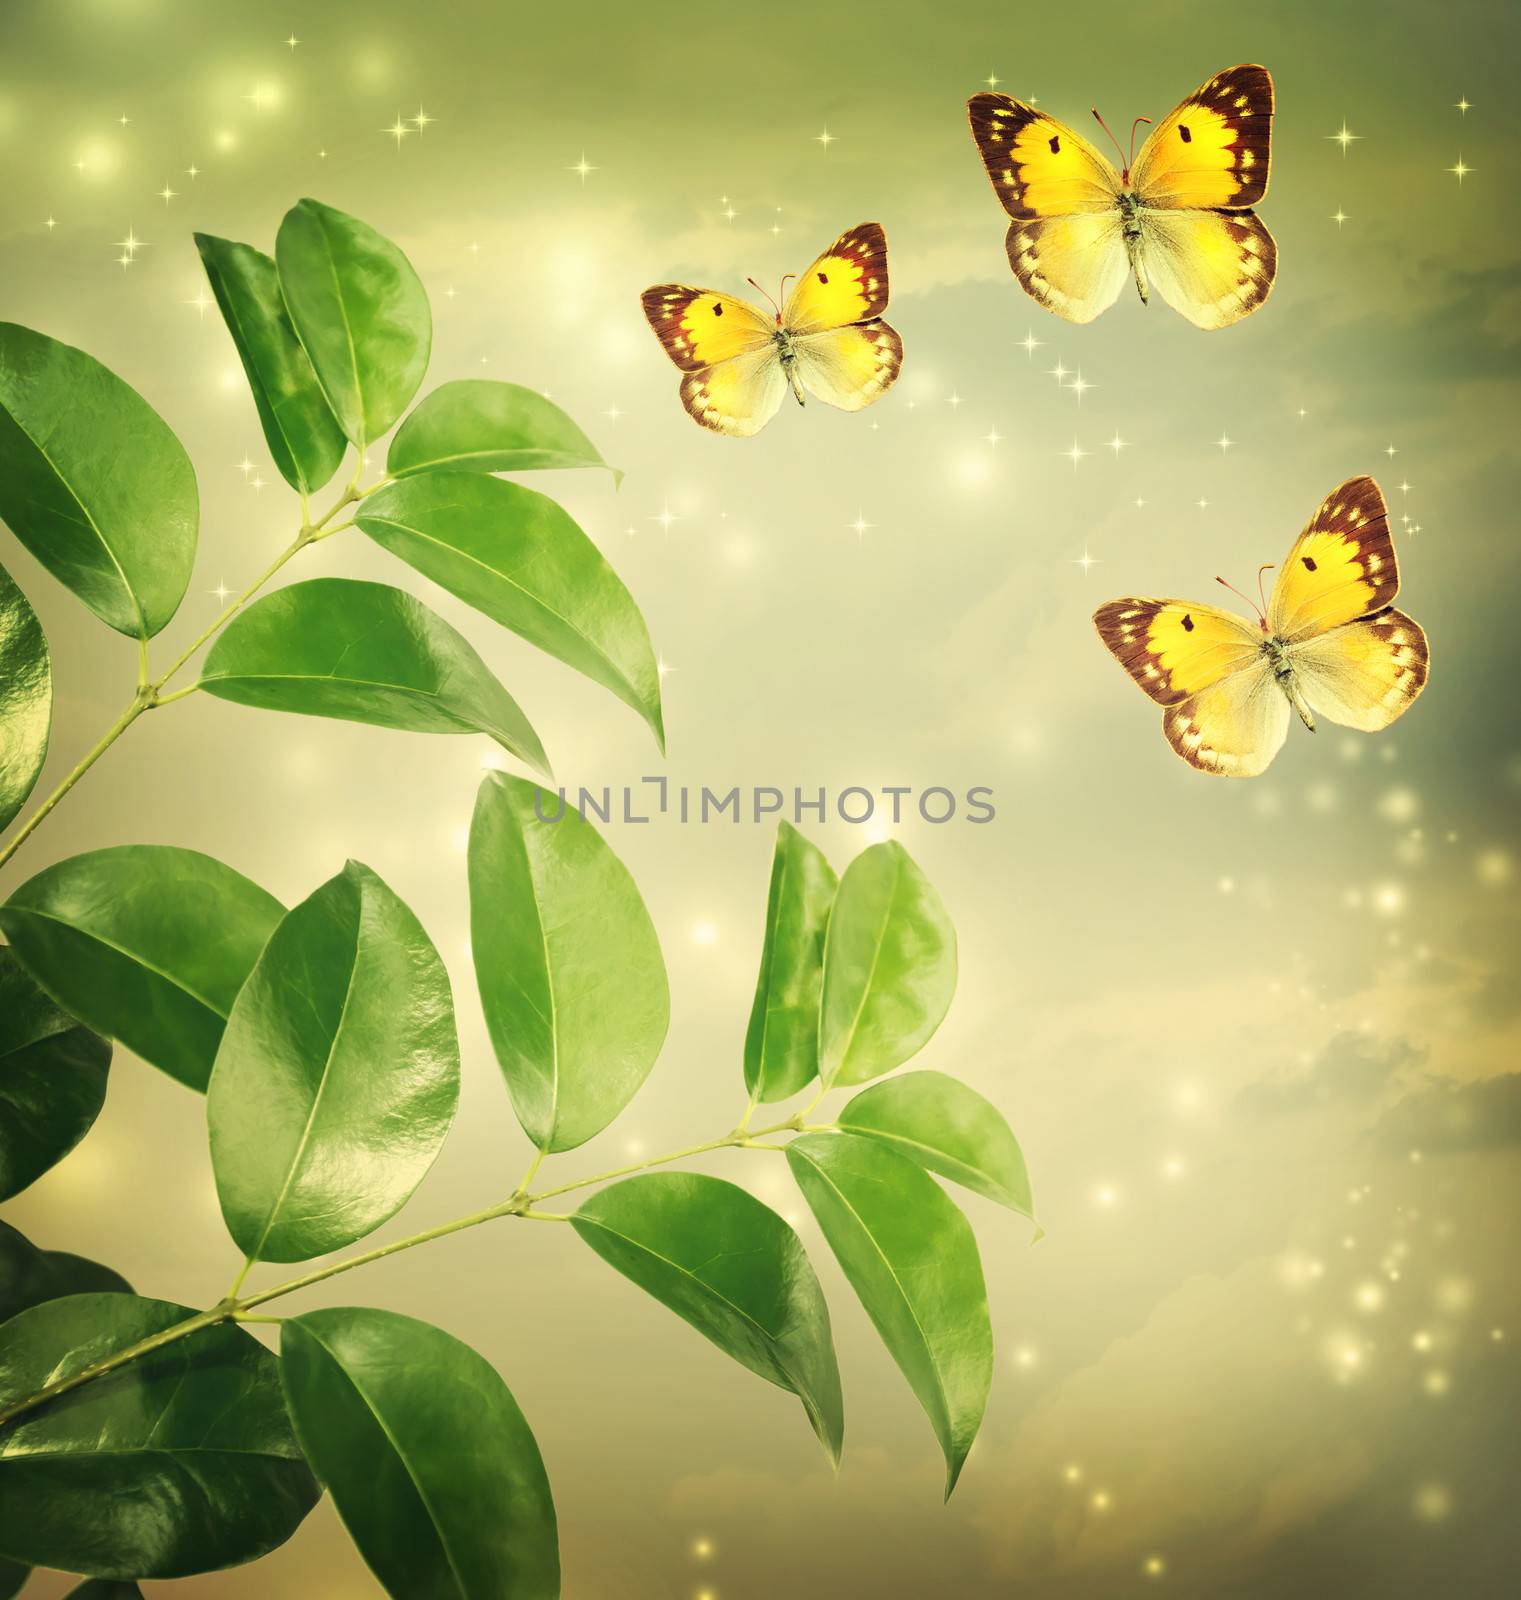 Butterflies on a Green Star lights Background with green Leaves